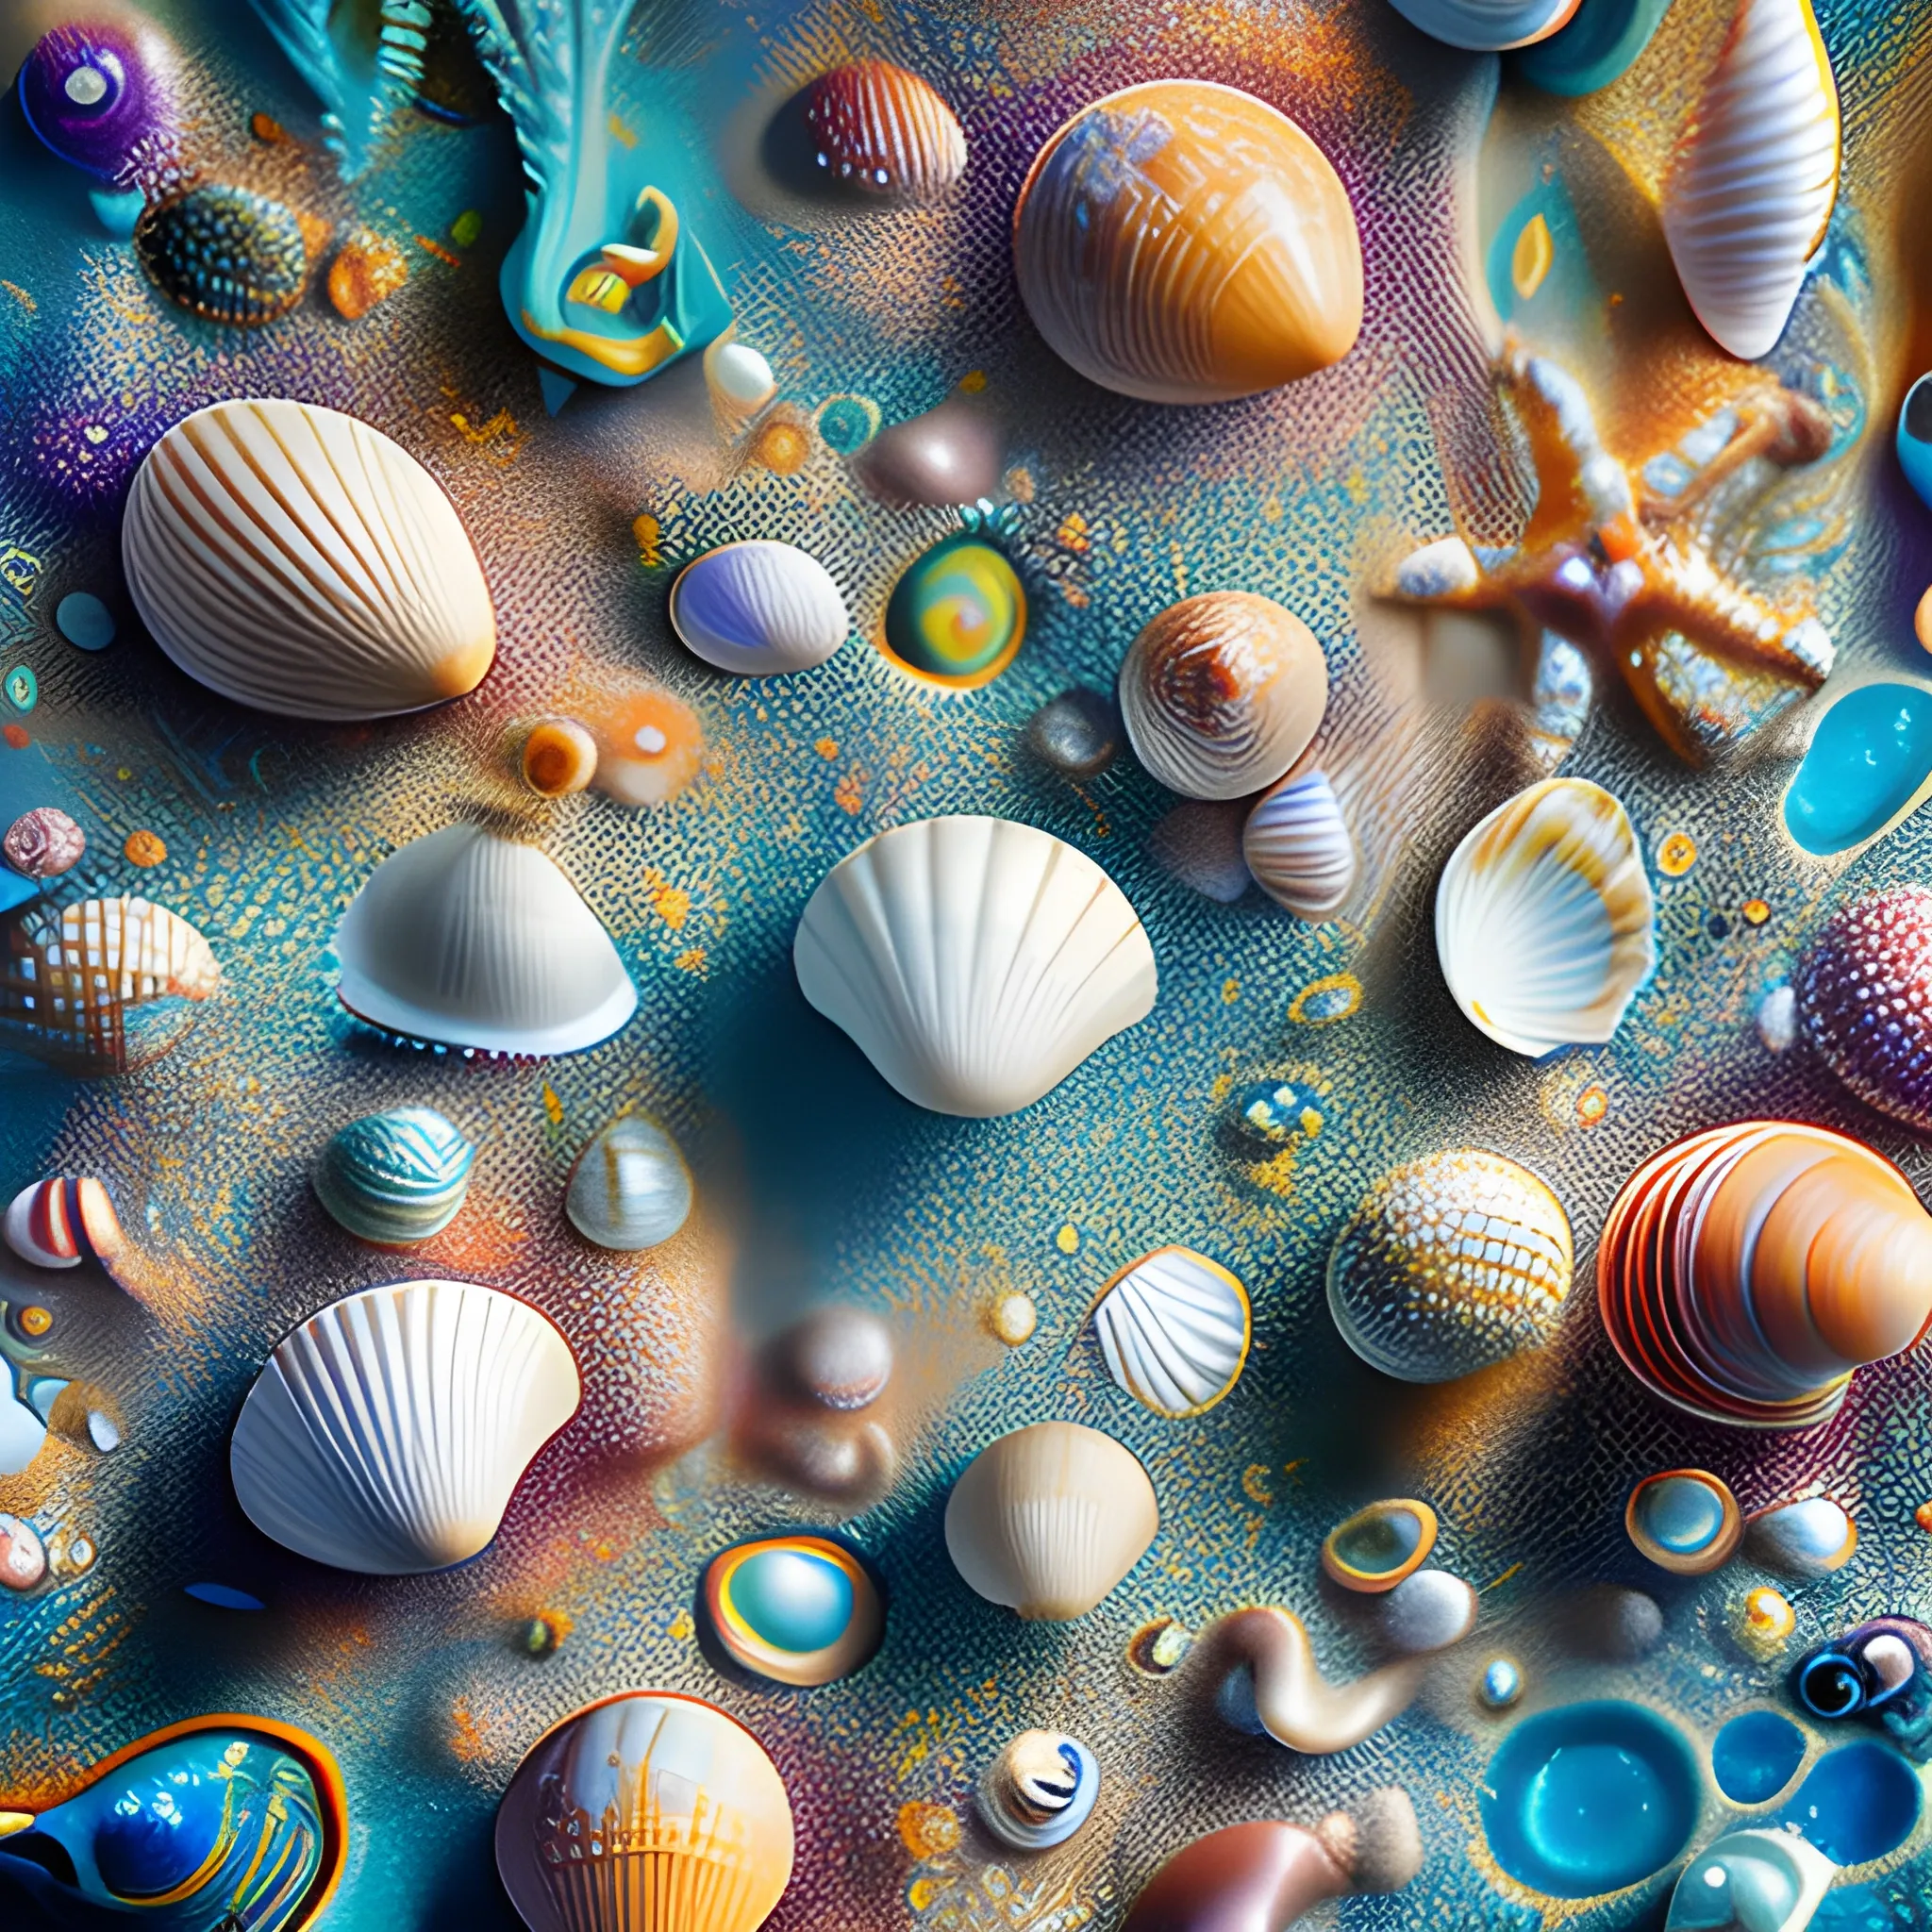 Splash Art, close-up macro shots of unusual sea creatures among dazzling white sands and vivid shells on the seafloor using available light, in the style of impressionist paintings.